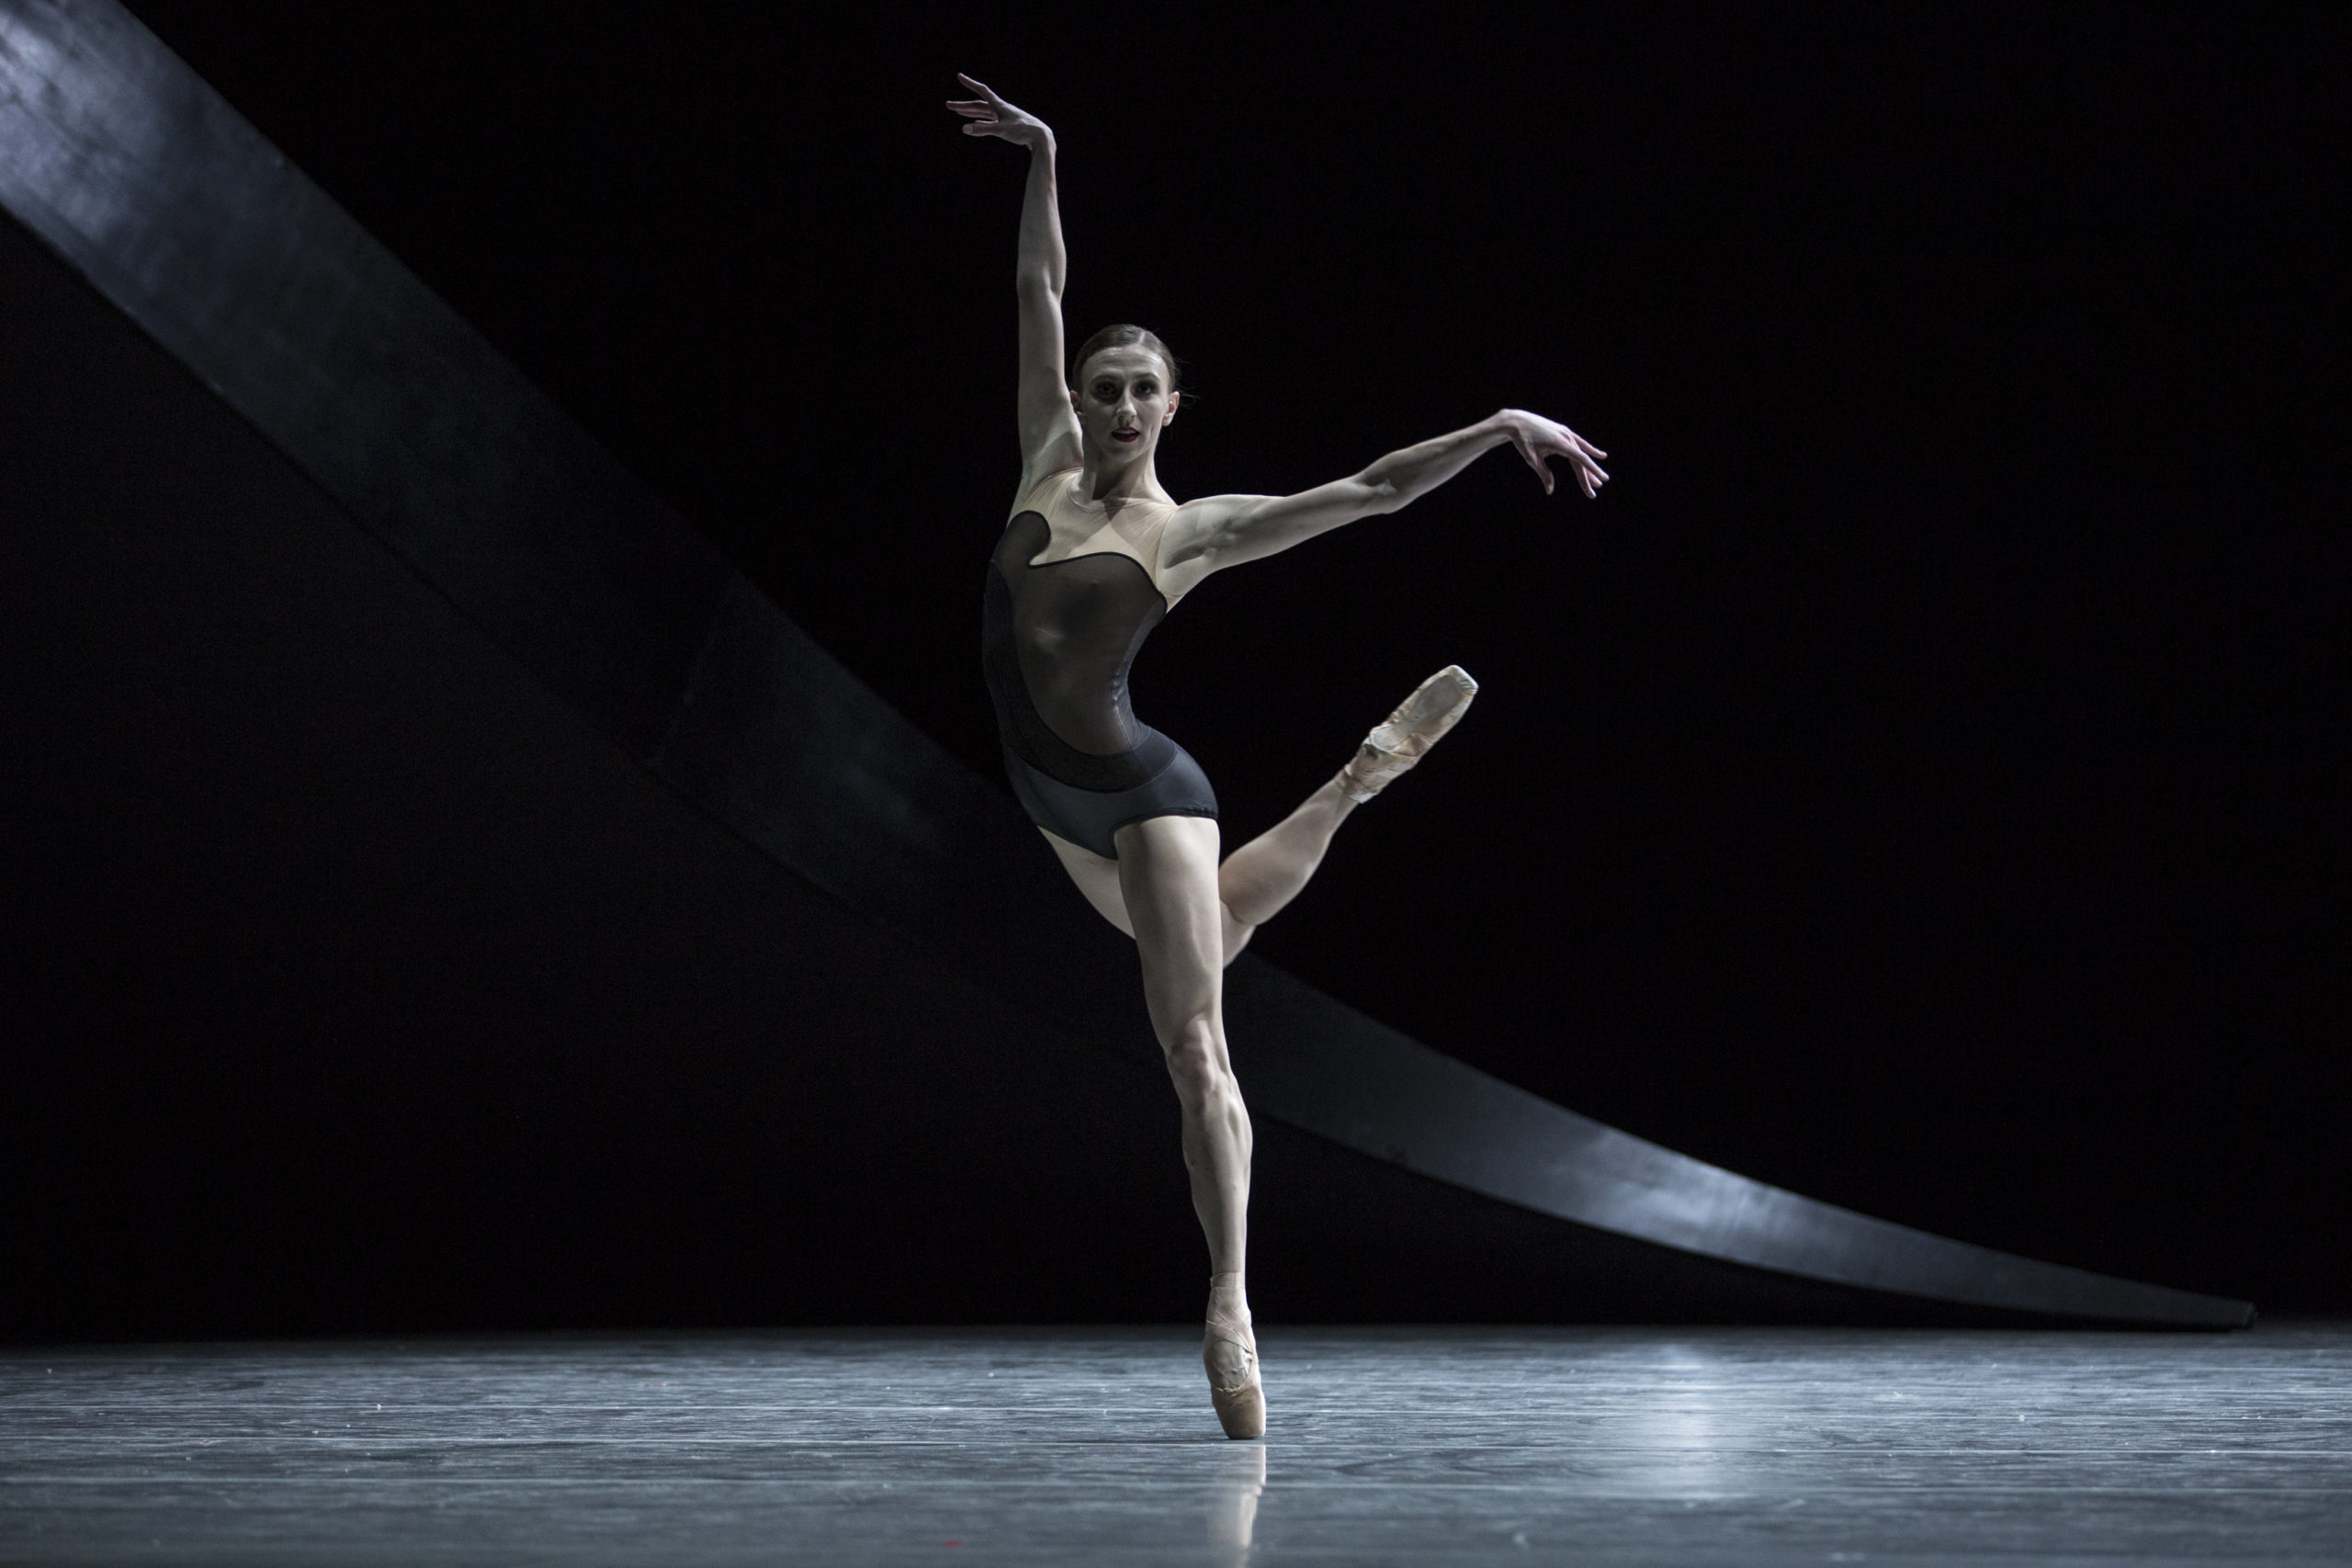 Elle Macy, wearing a dark leotard and pointe shoes, stands on her left foot on pointe on a darkened stage and kicks her right leg up behind her. She holds her right arm up high and her left arm out to the side.